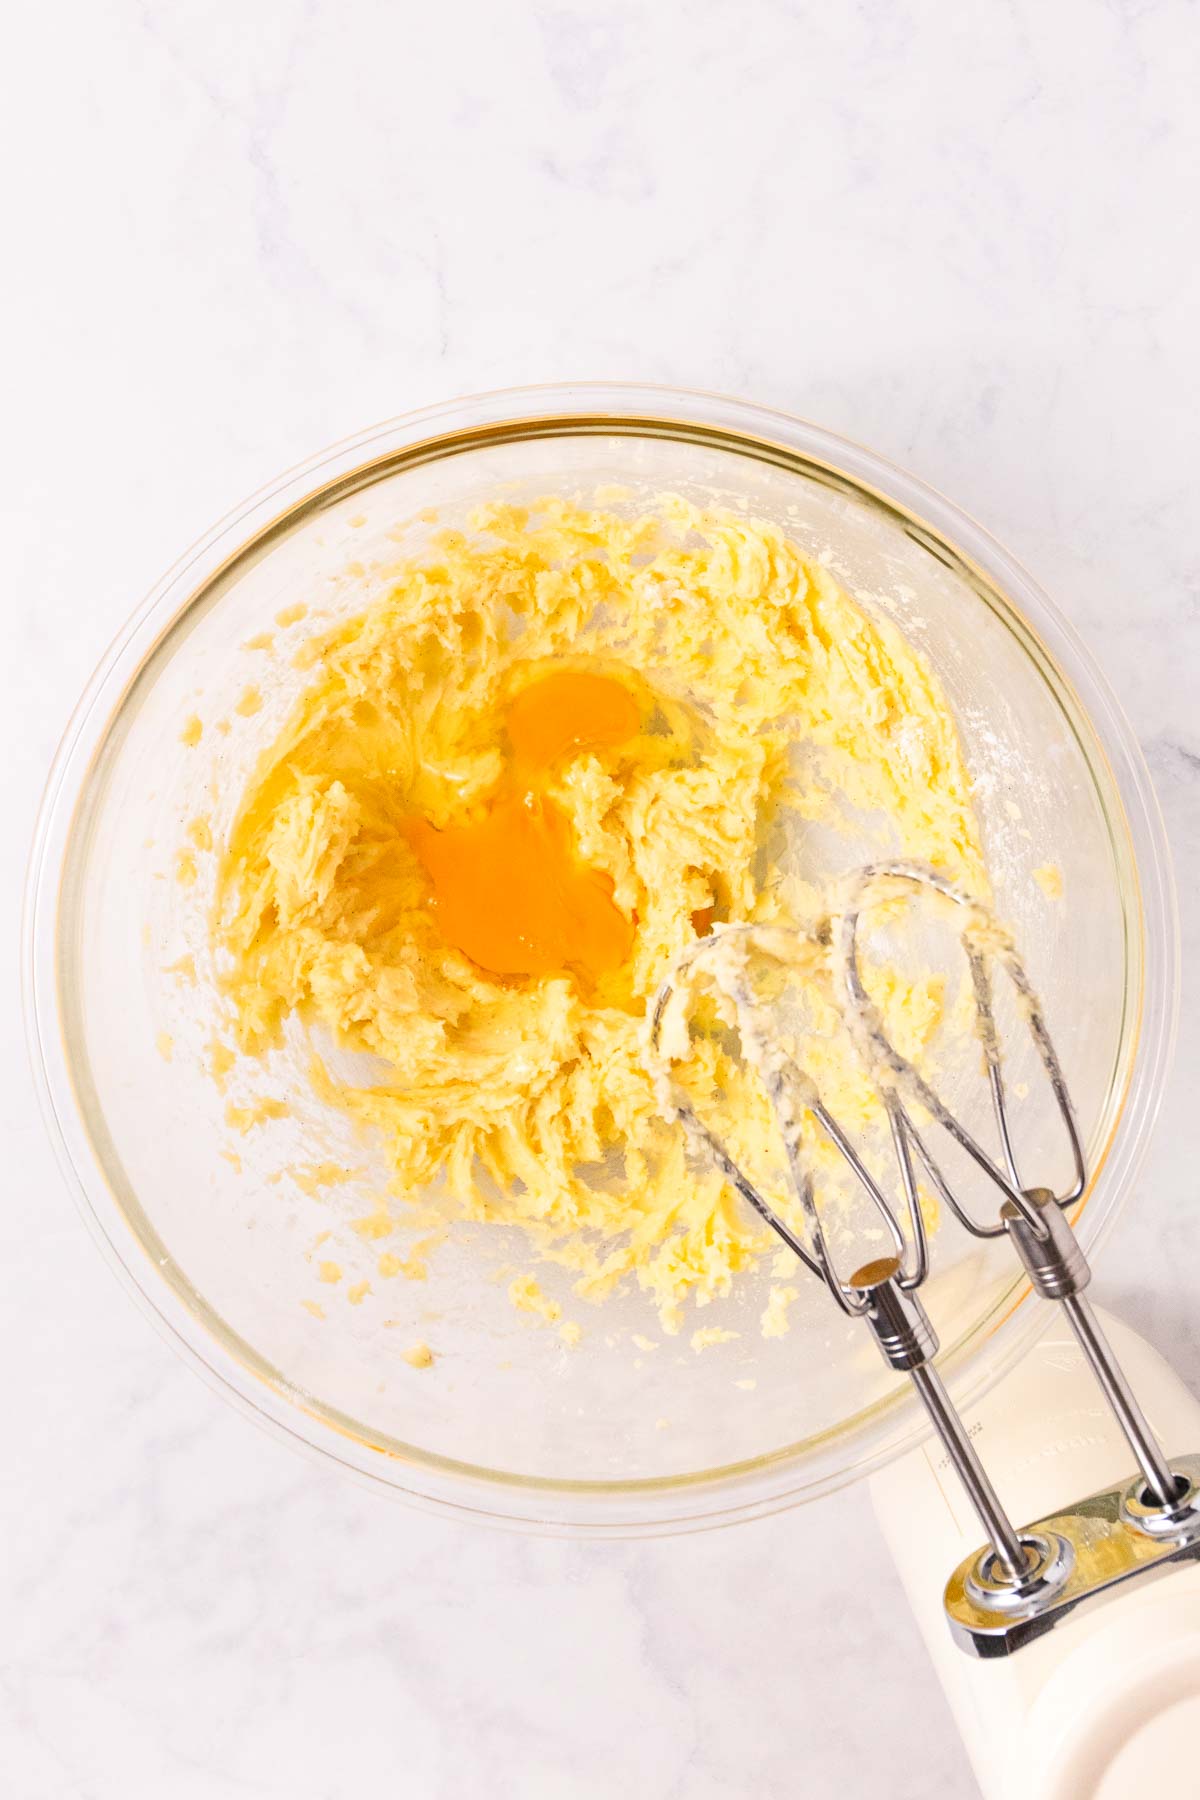 The creamed butter and sugar mixture, with an egg added, in a large glass bowl.